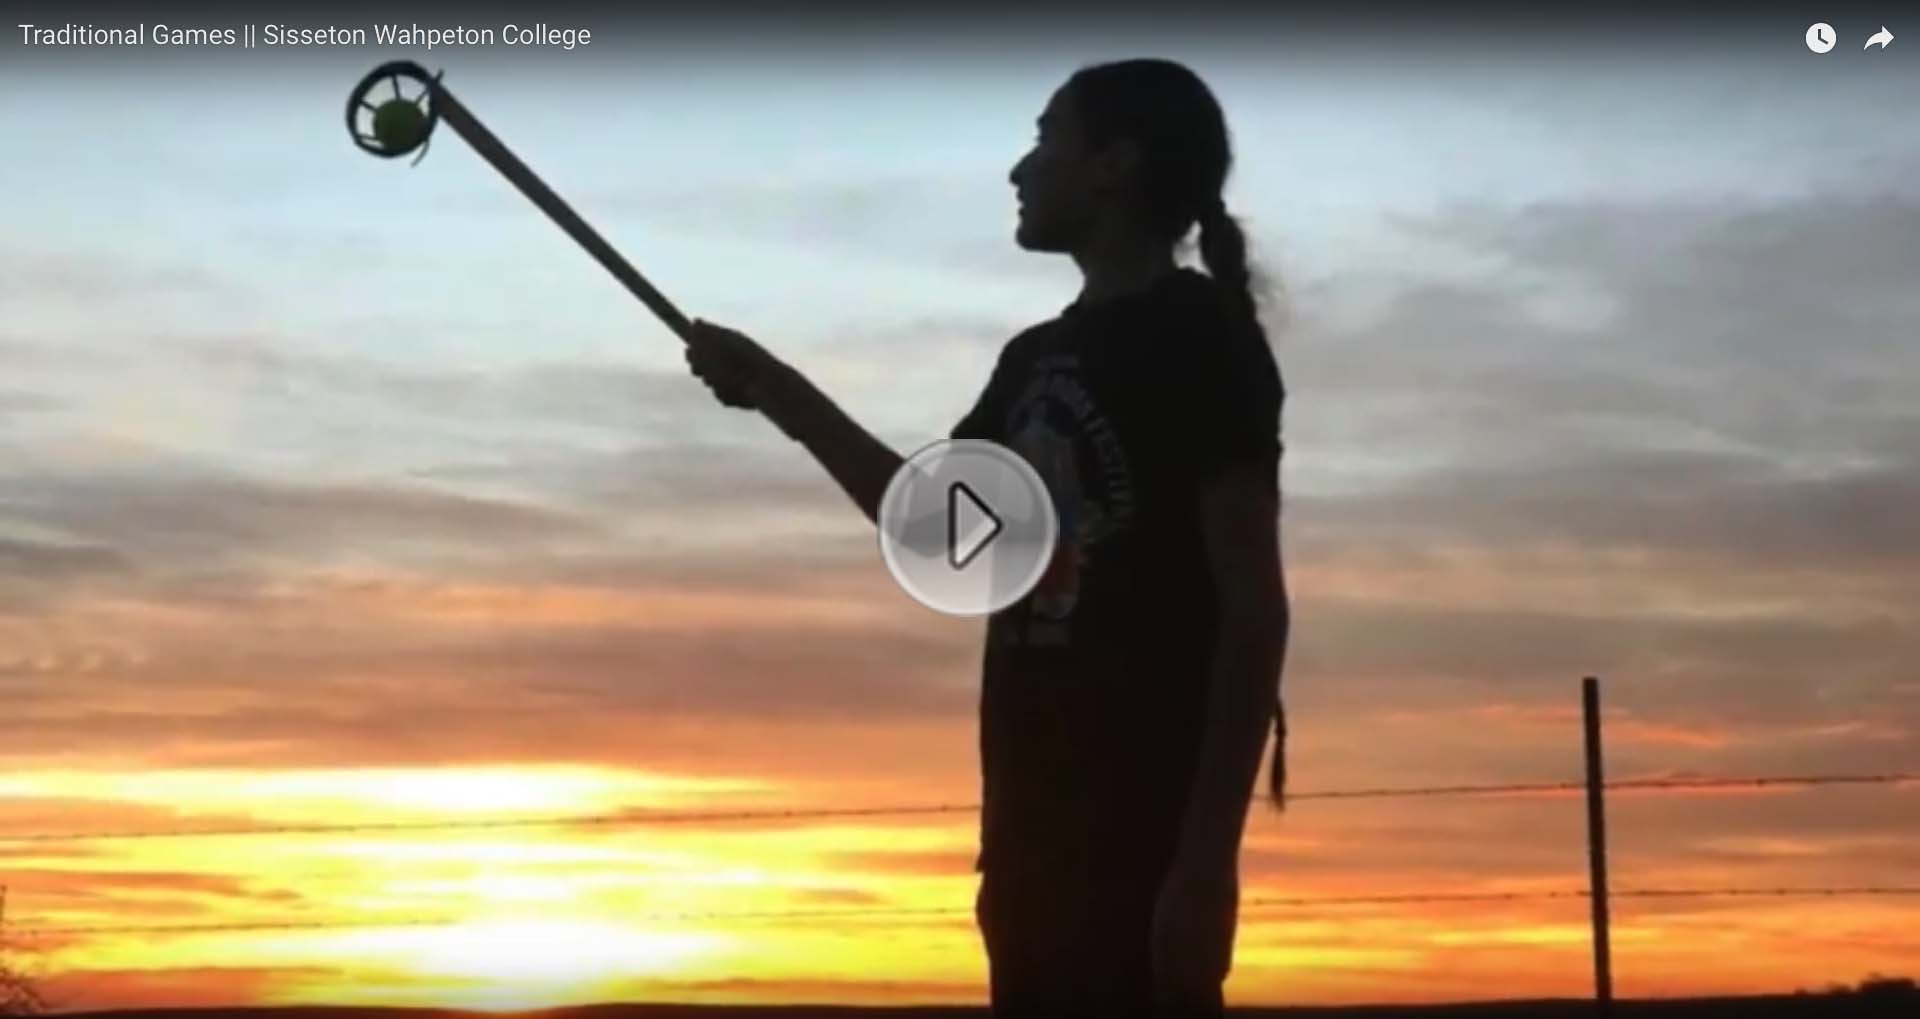 Image of person against a sunset with a link to click to see the Traditional Games (Ehanna Woyute) Film produced by Sisseton Wahpeton College Students on Traditional Dakota Games.